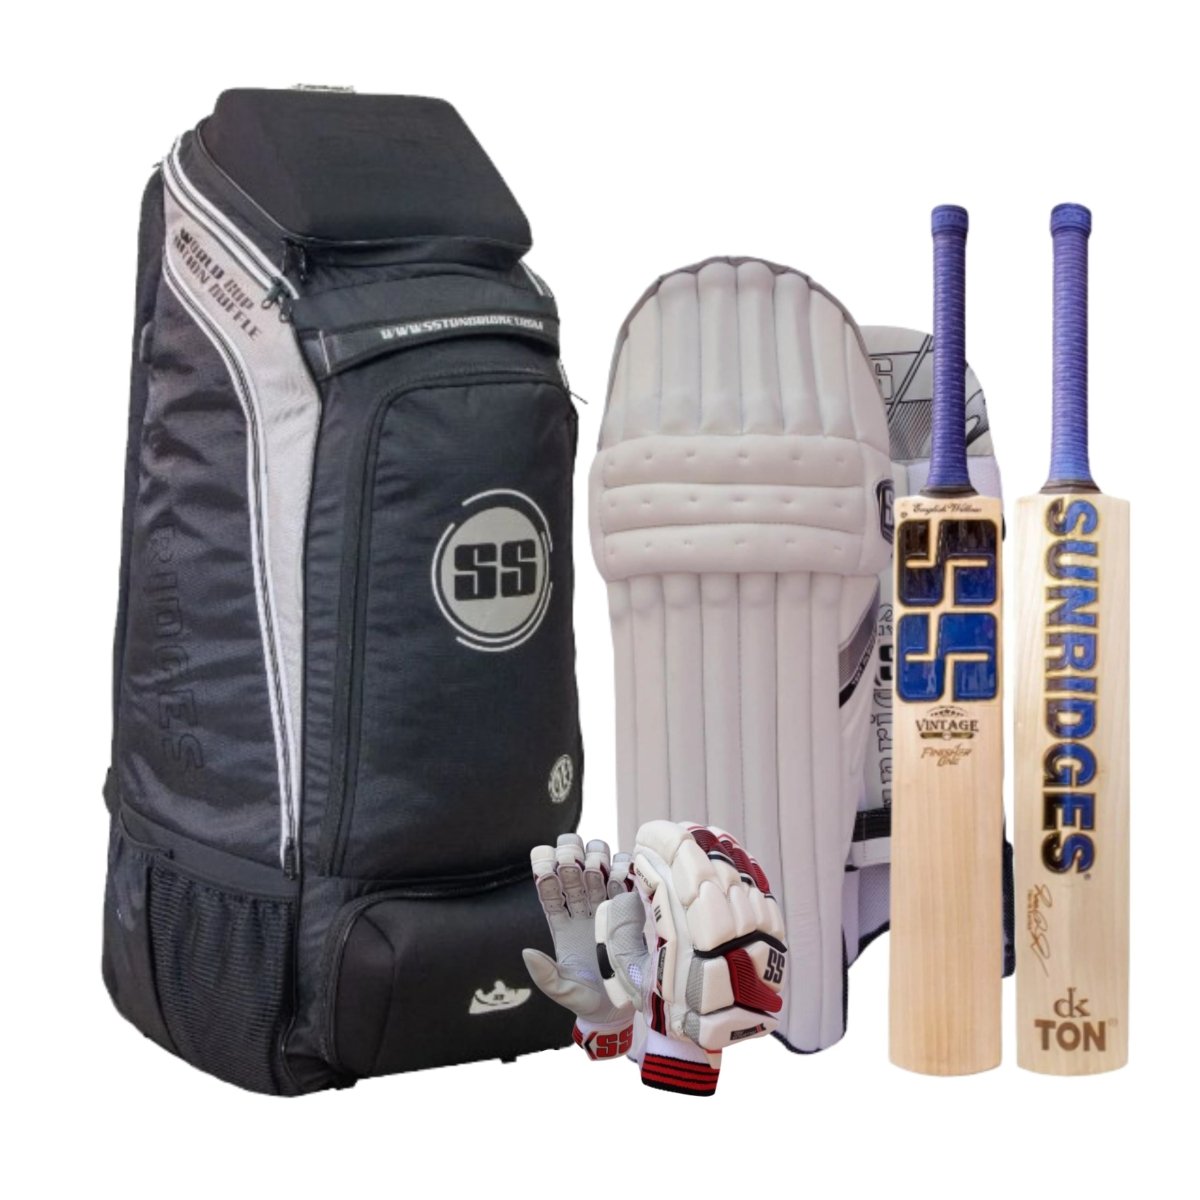 SS Vintage Finisher One English Willow Bat + SS Test Player Batting Pads + SS Millenium Pro Batting Gloves + SS Worldcup Duffle - Acrux Sports